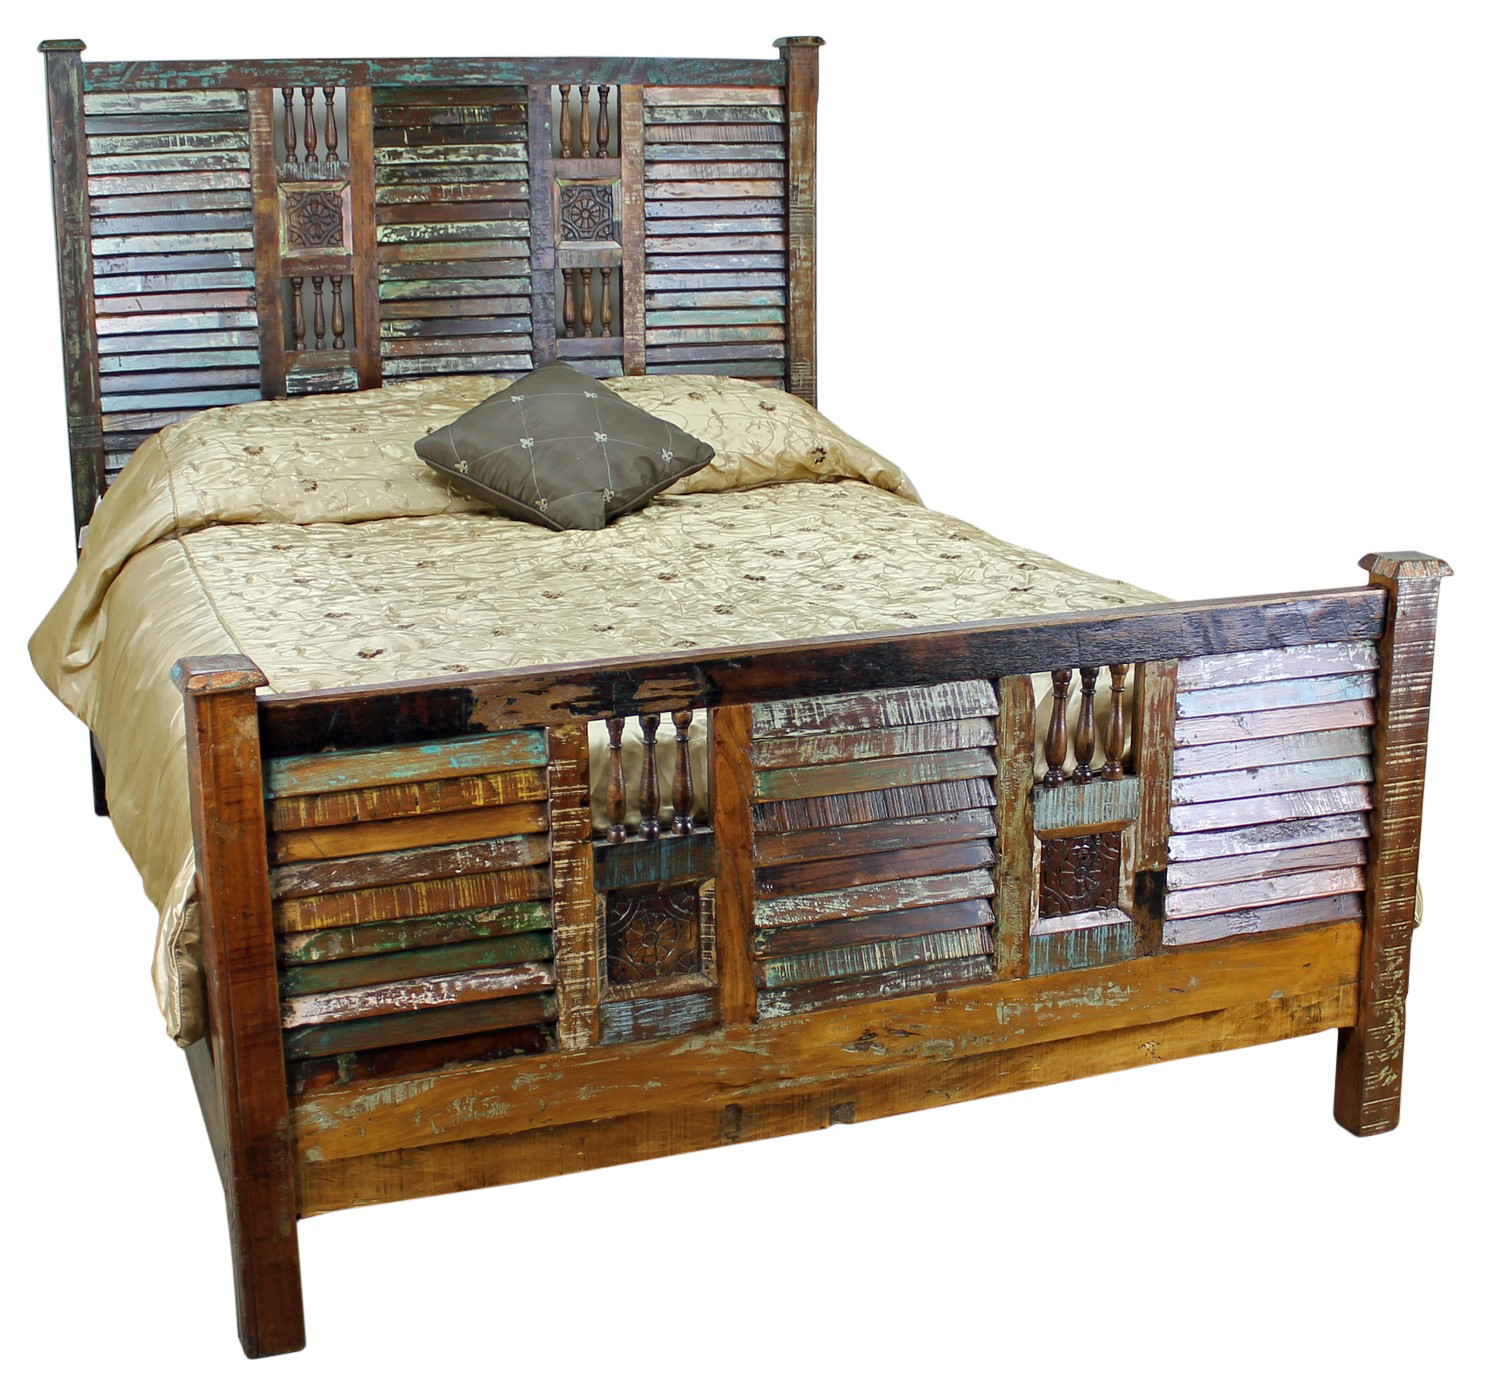 Top 59 Prime Log Beds Rustic Full Size Bed Chairs Bedroom Decor regarding sizing 1500 X 1390